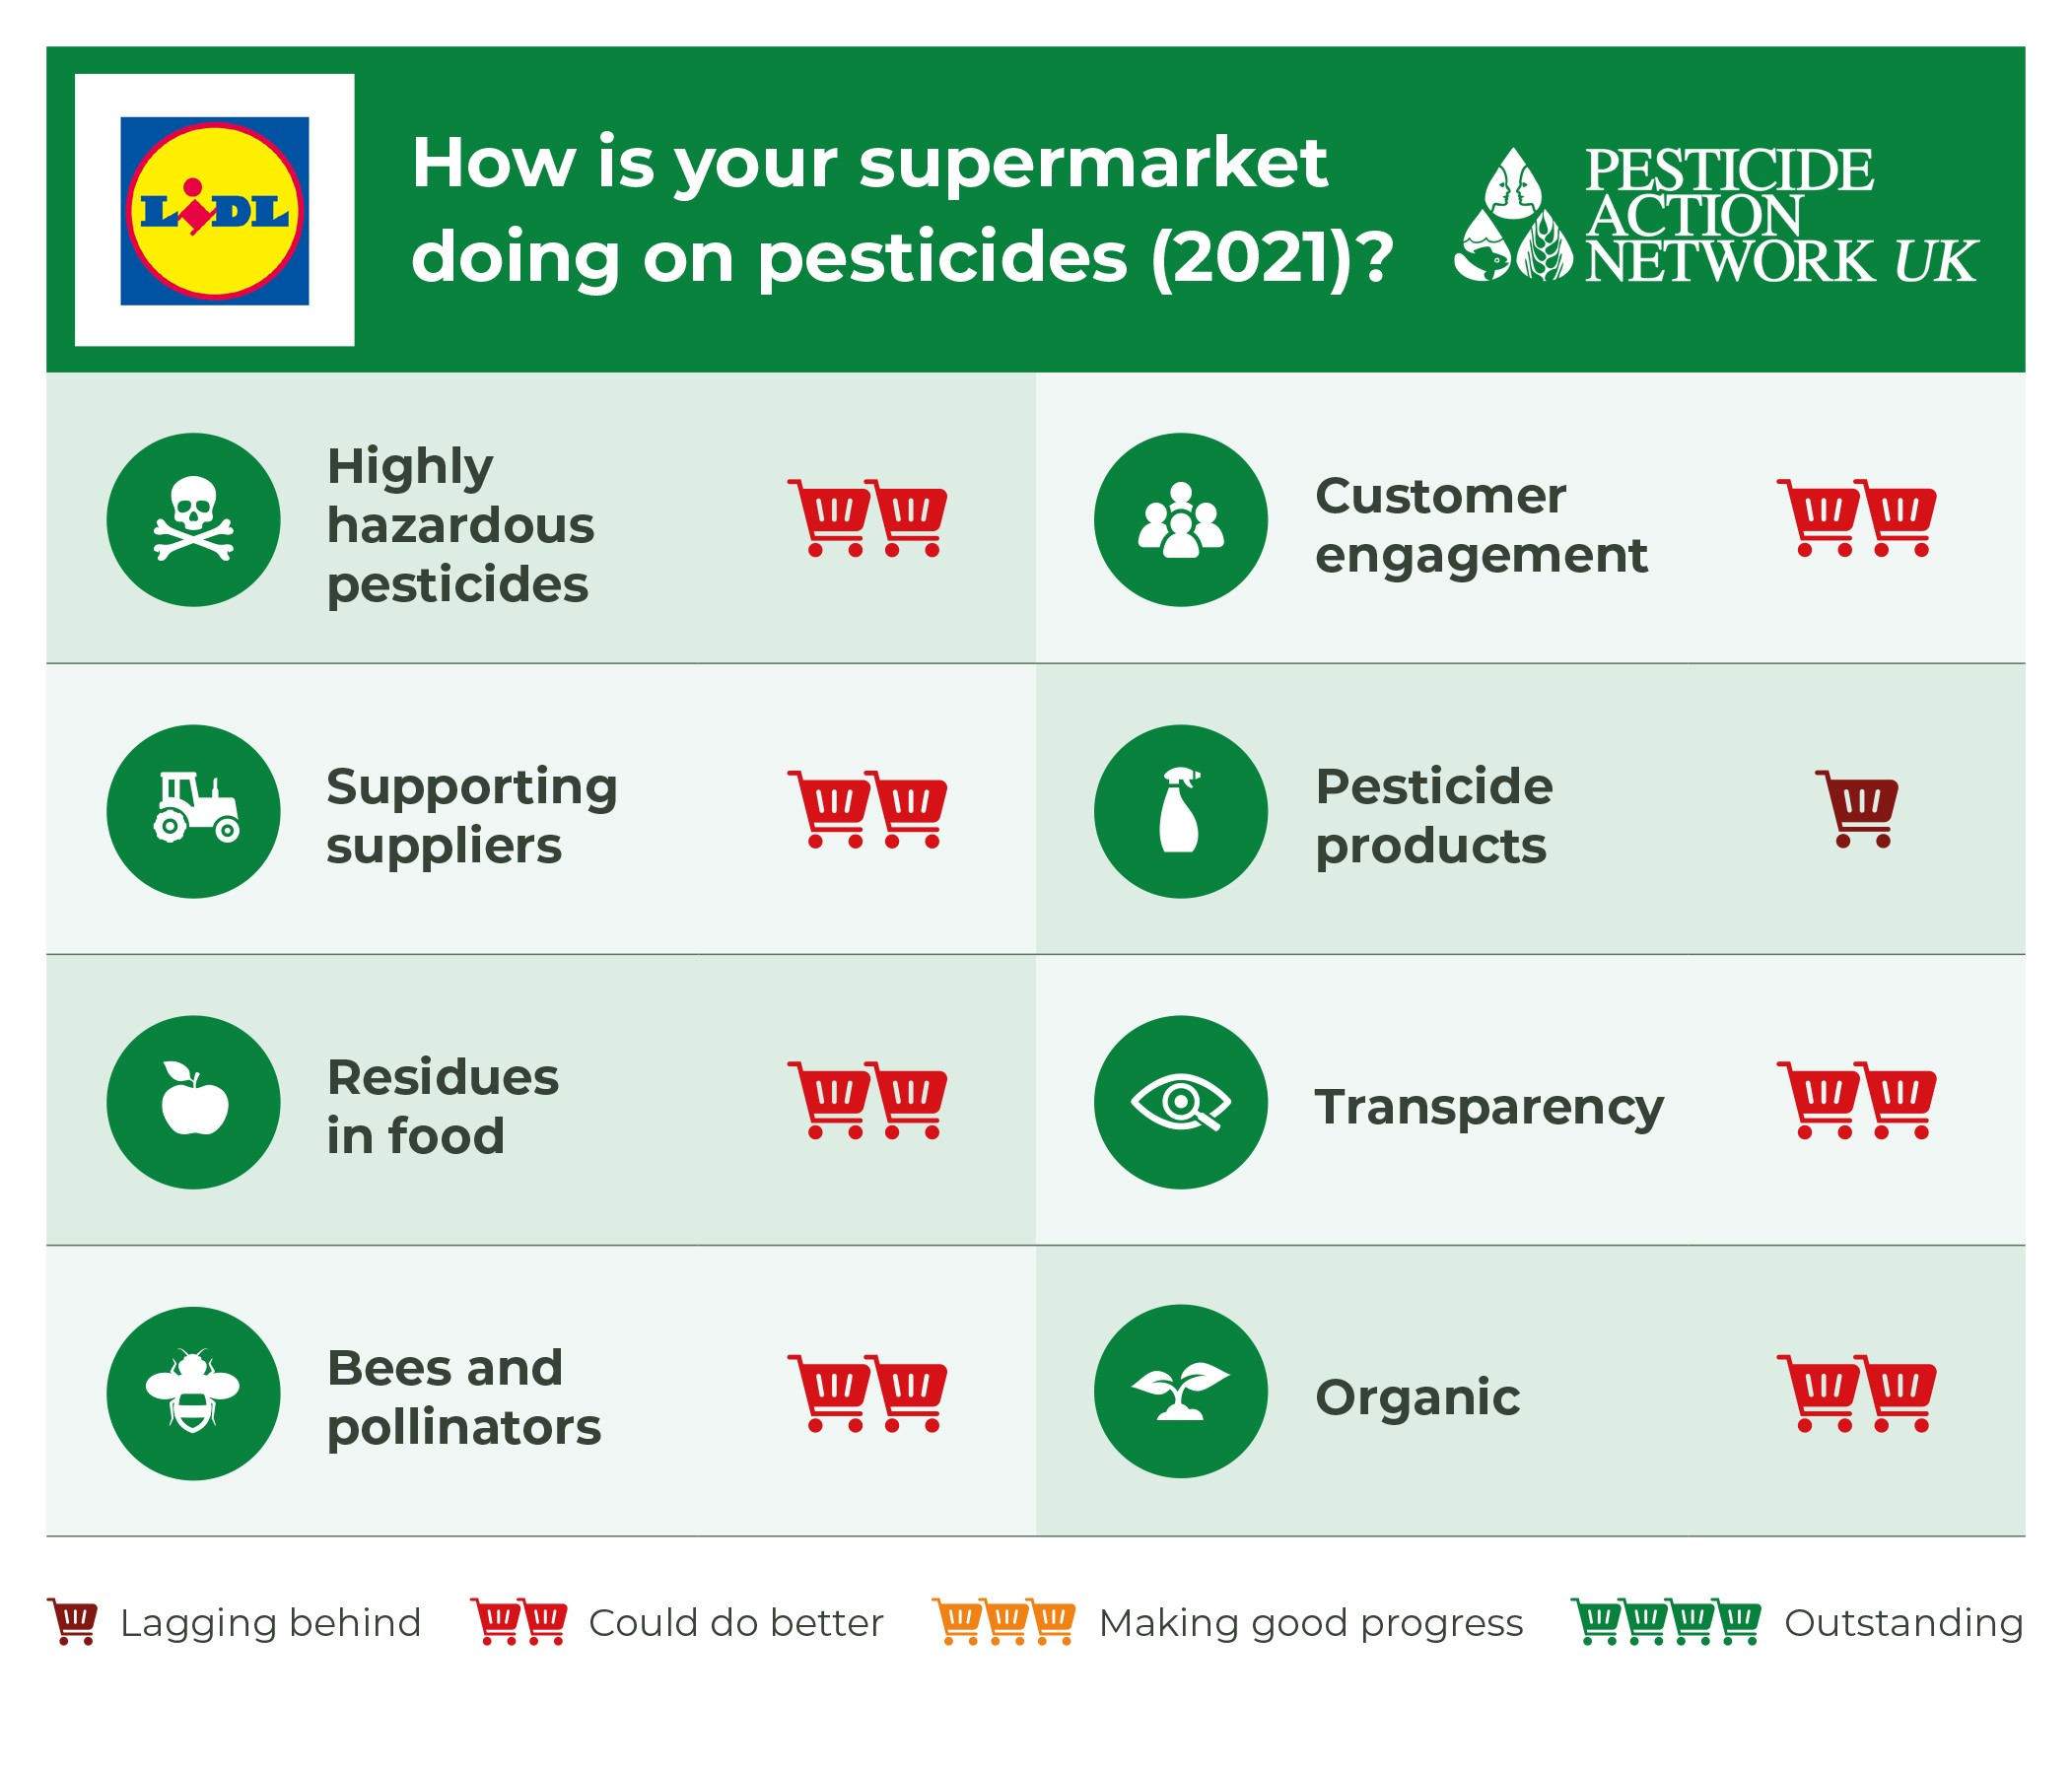 How is Lidl doing on pesticides?